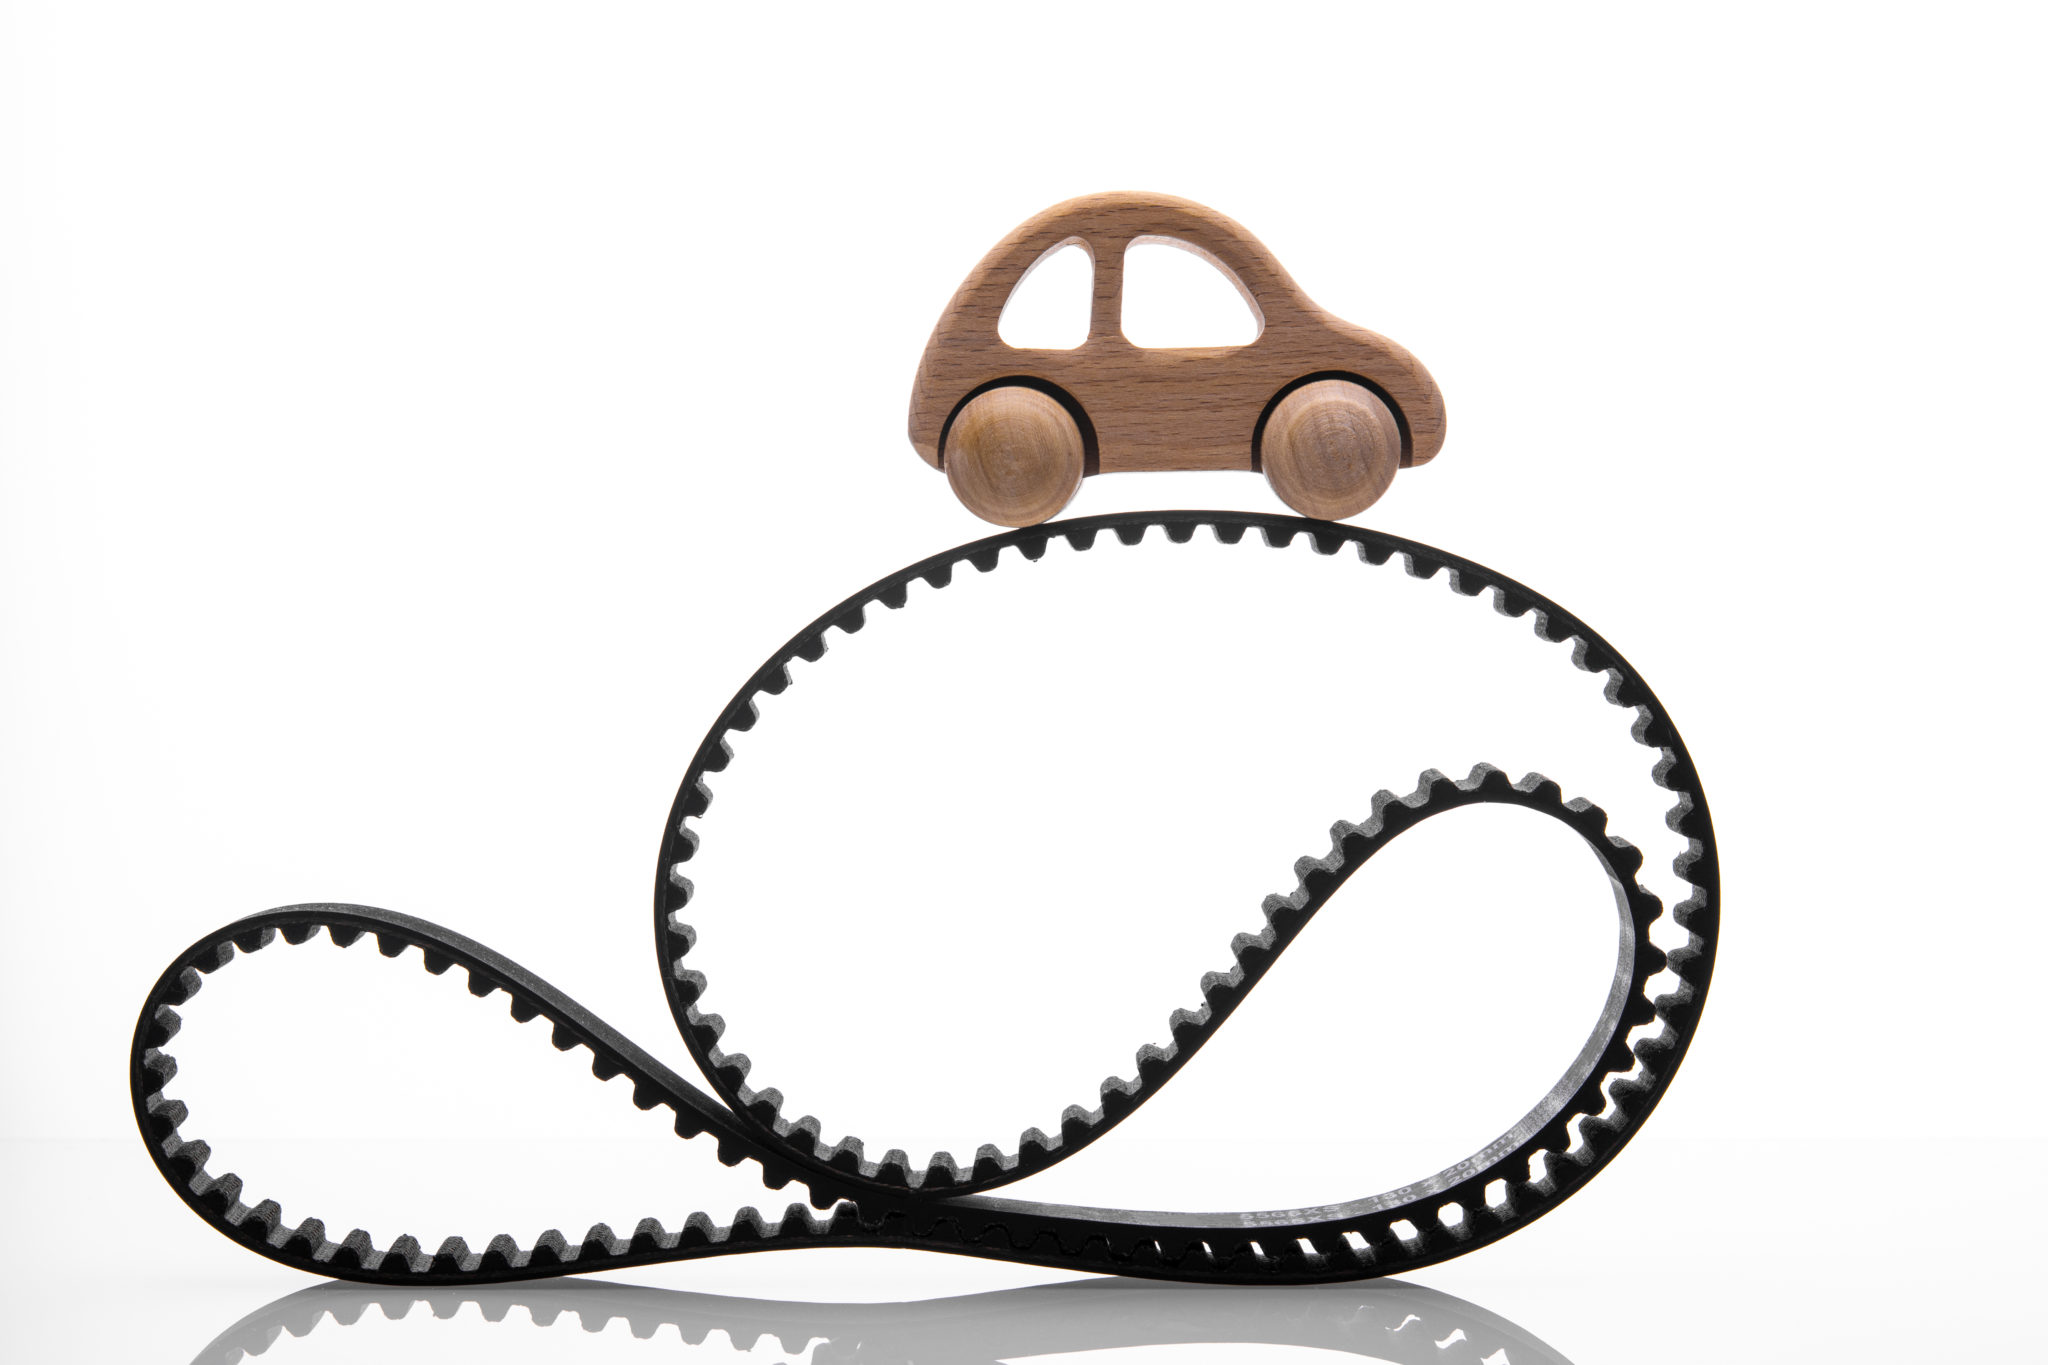 https://autolab.com.co/wp-content/uploads/2023/08/timing-belt-with-toy-car-on-a-white-background-2021-09-04-09-29-23-utc-scaled.jpg